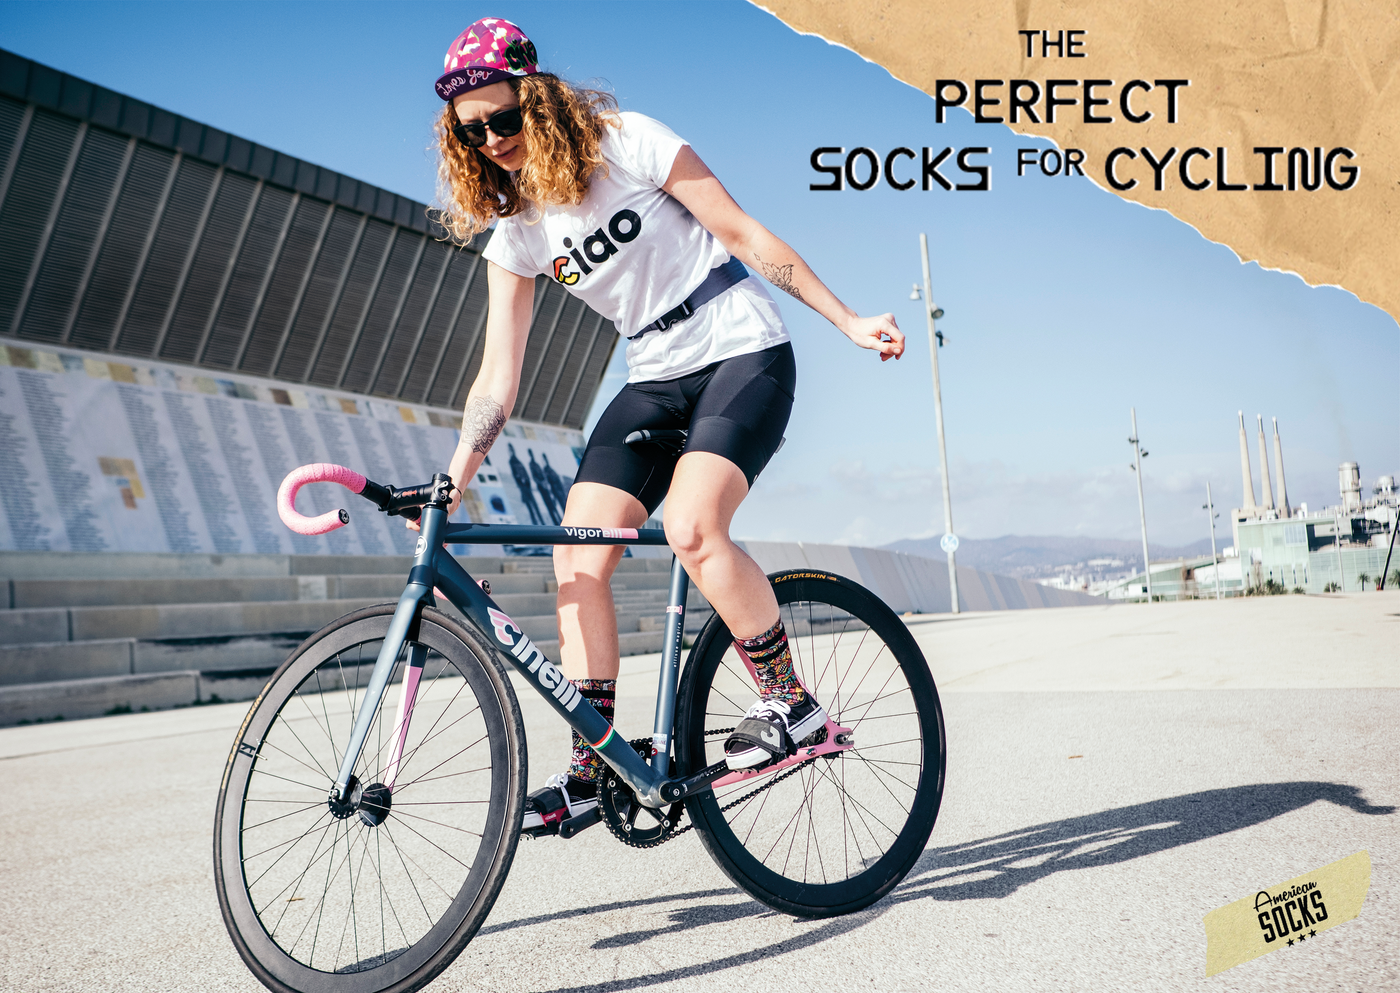 THE PERFECT SOCKS FOR CYCLING 🚴